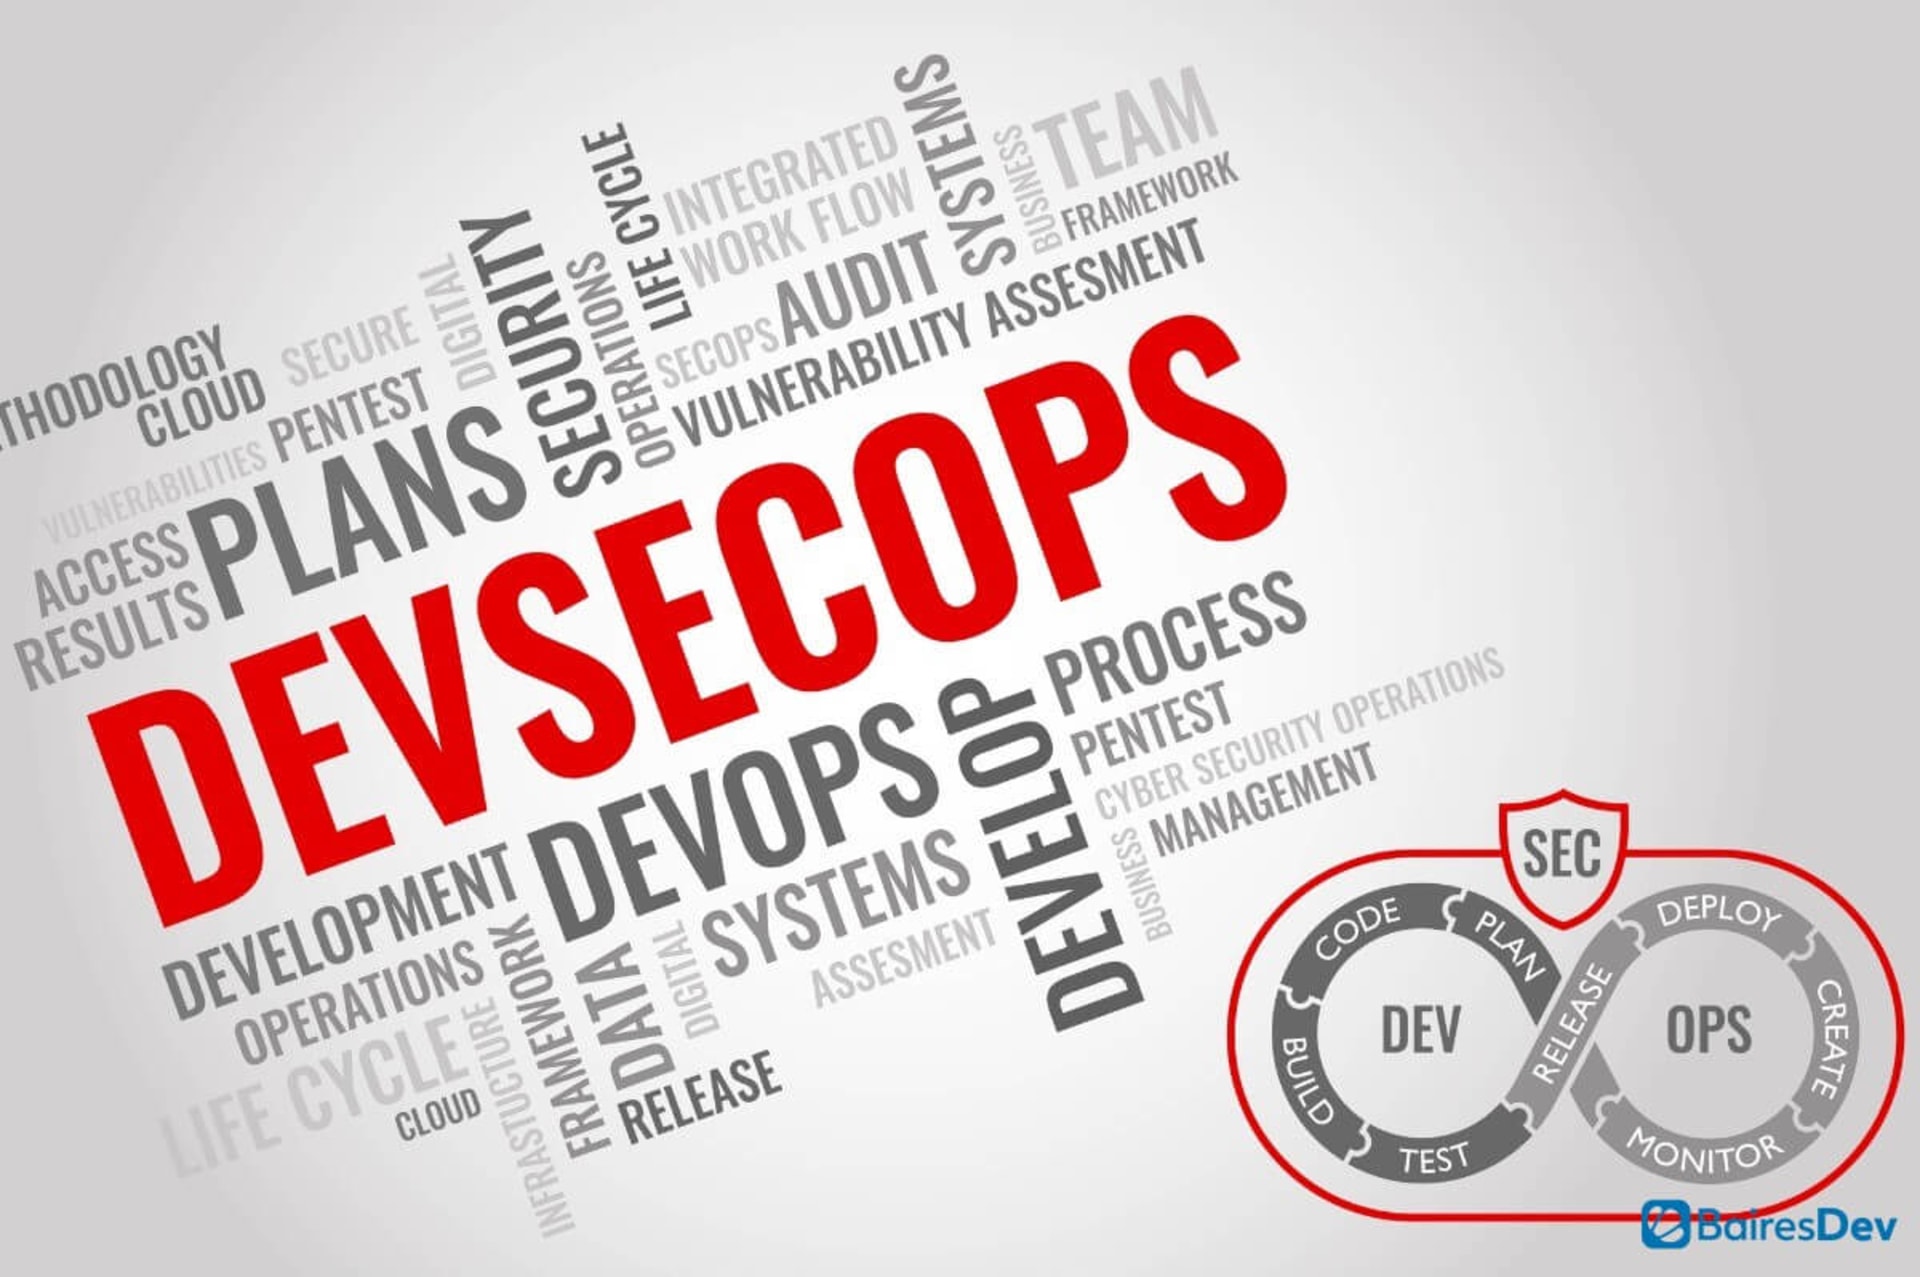 Innovation - Why Is DevSecOps 